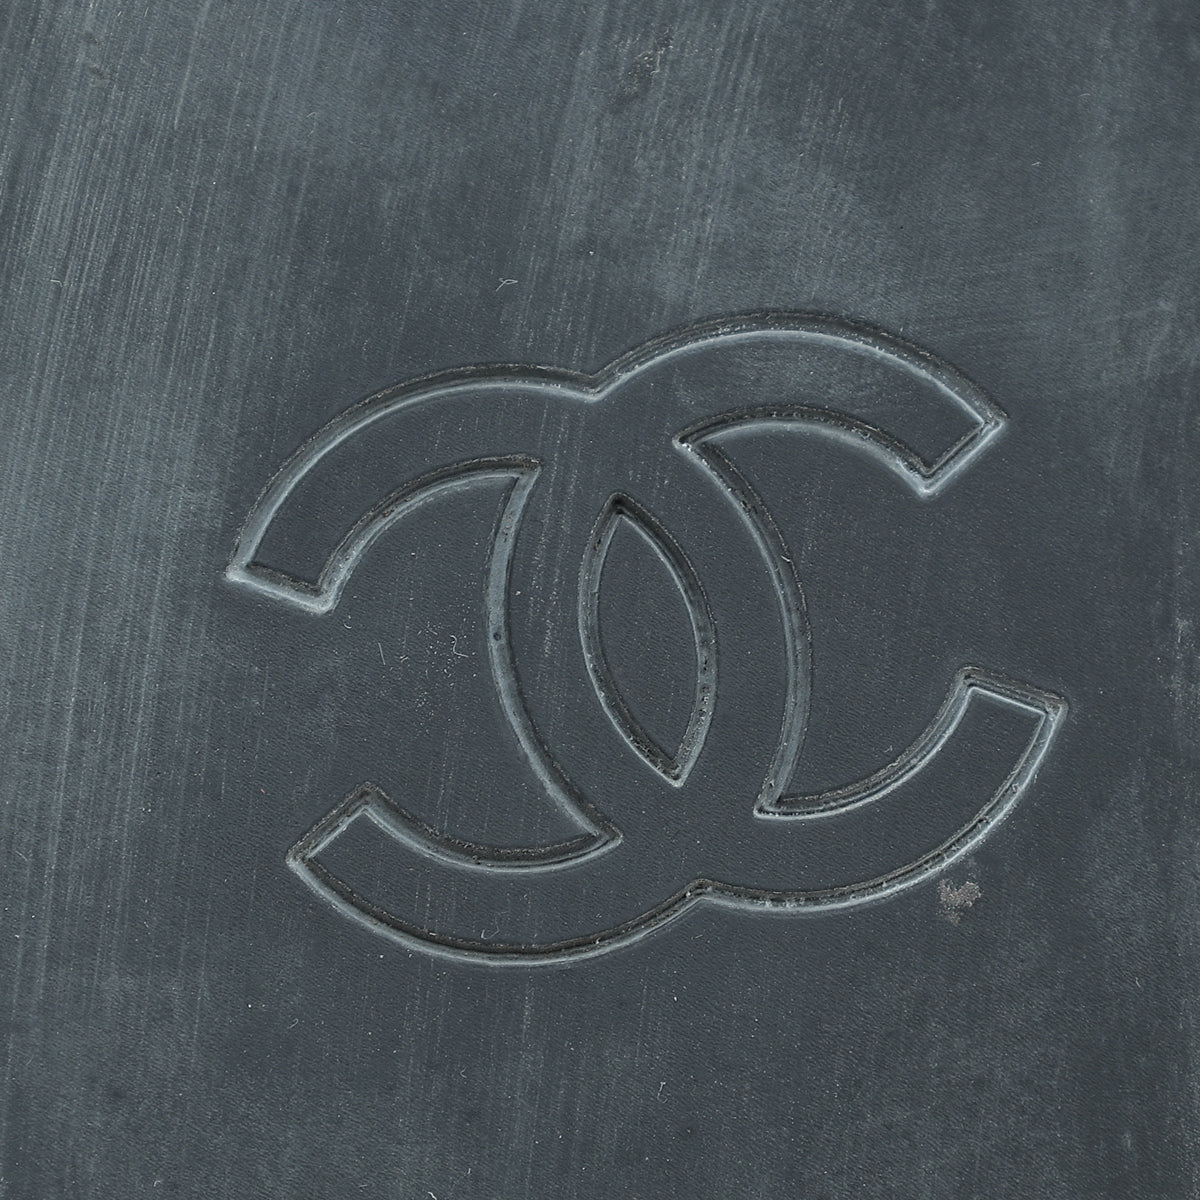 Gold Chanel Logo on Black Background Print A1 to A4 Size  Miaandcostore